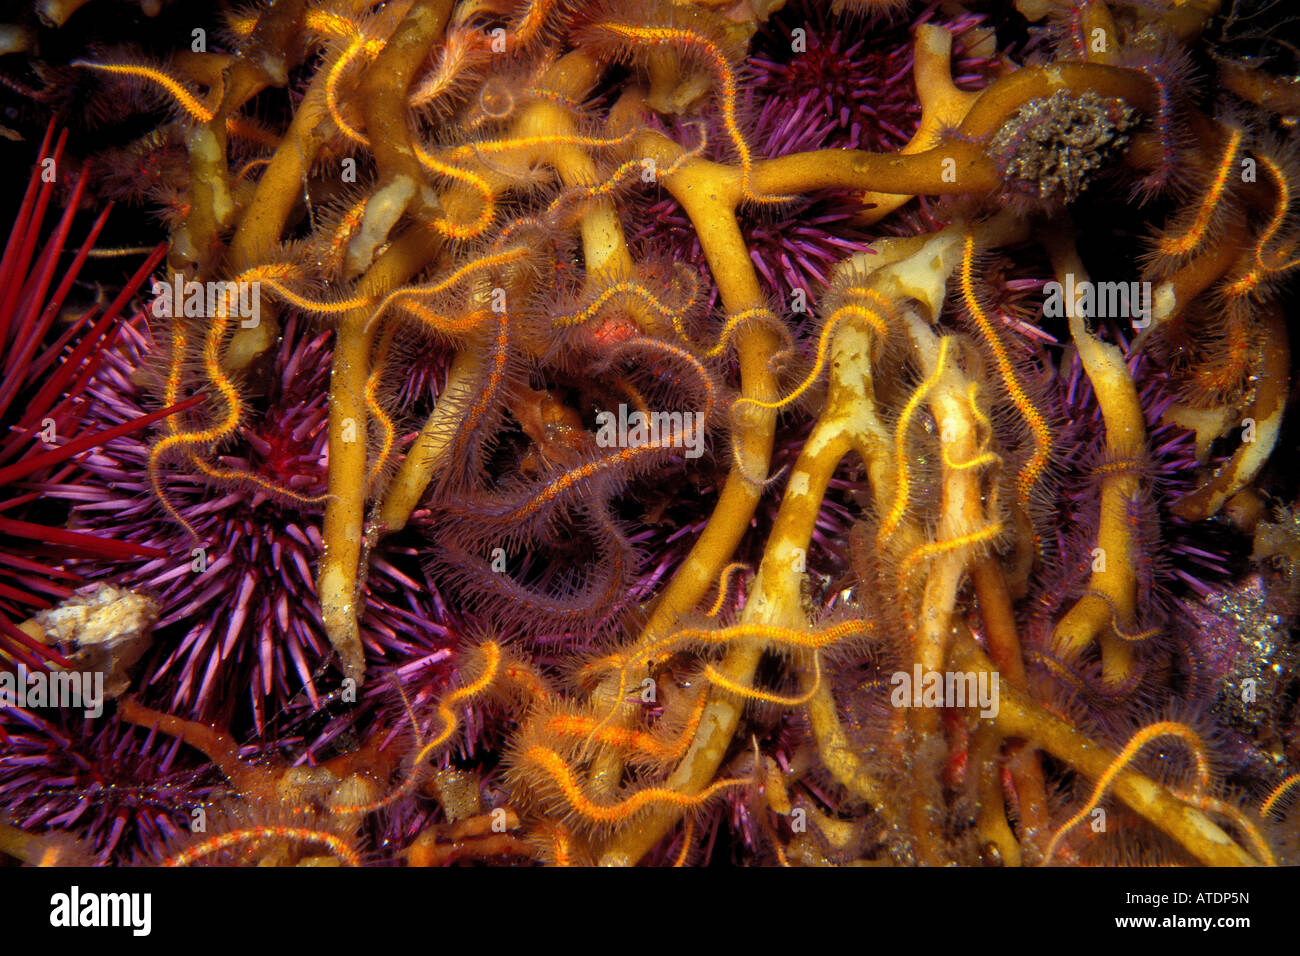 Sea urchins and brittle stars in kelp holdfast California Pacific Ocean Stock Photo